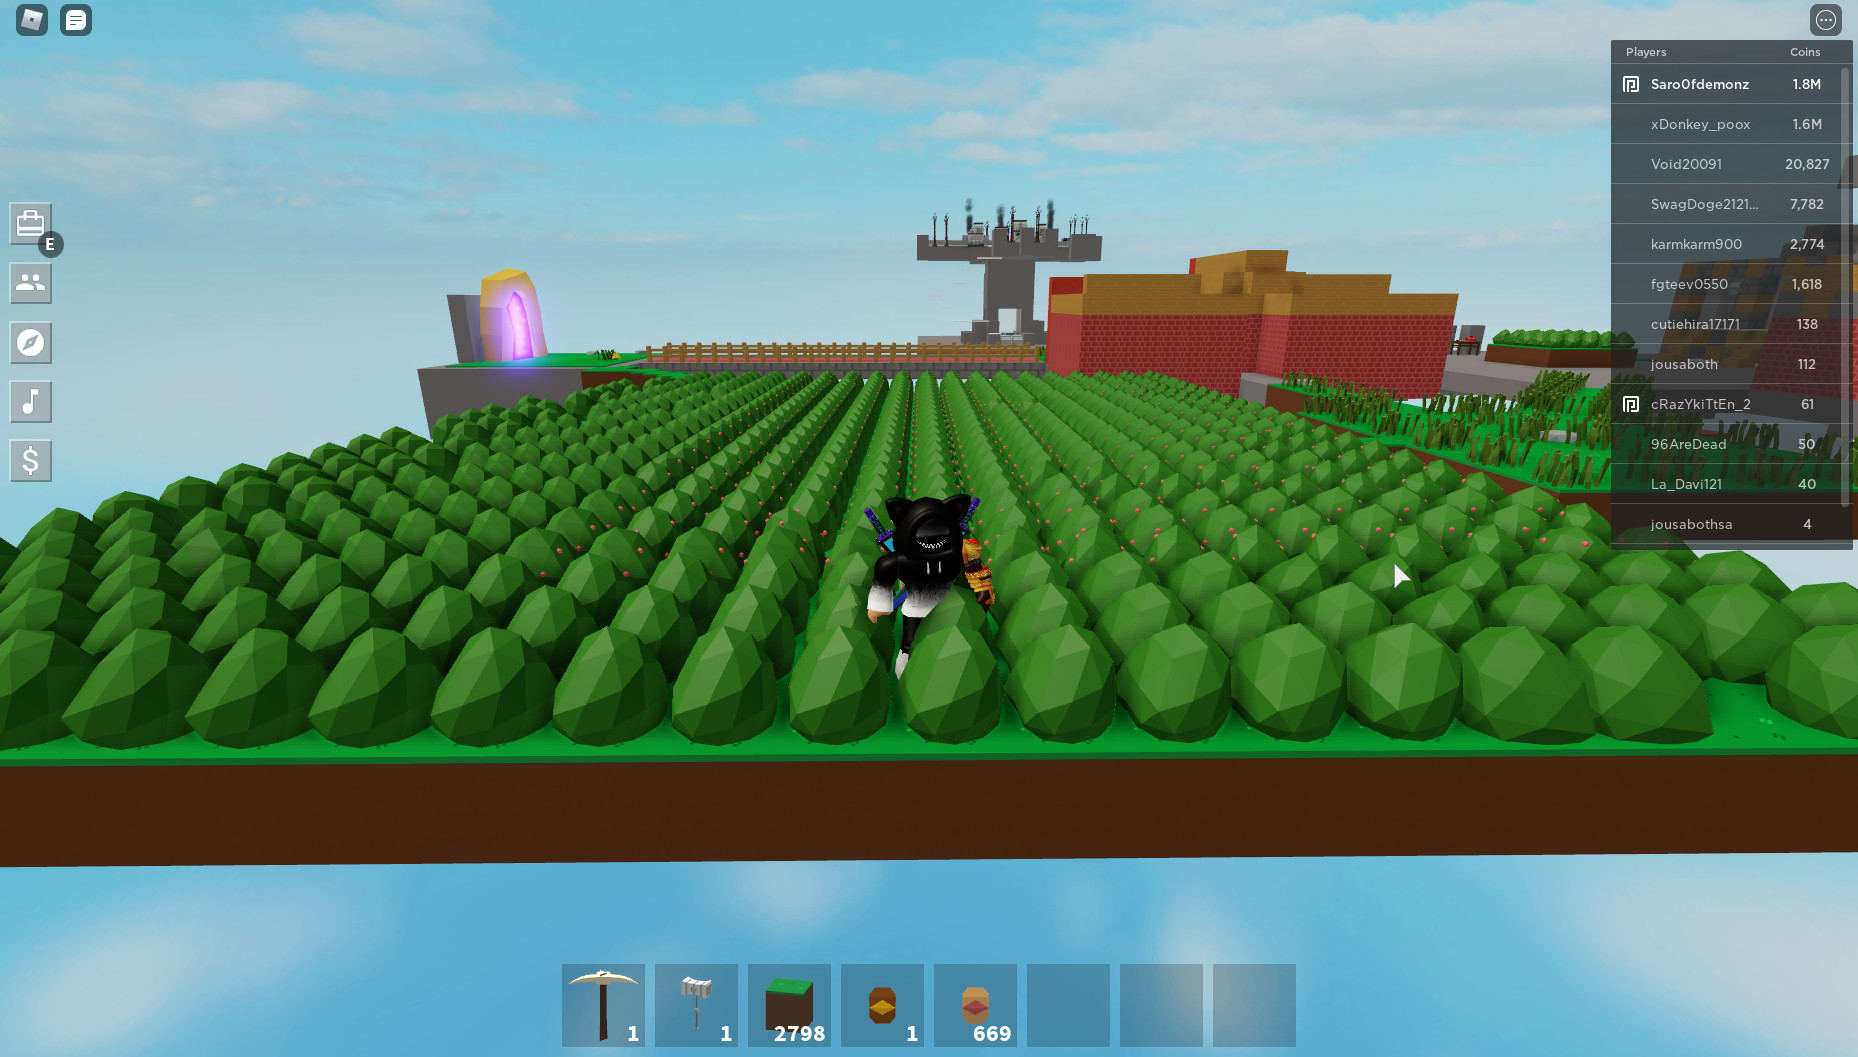 Build Farms For You In Roblox Skyblock By Saro0fdemons